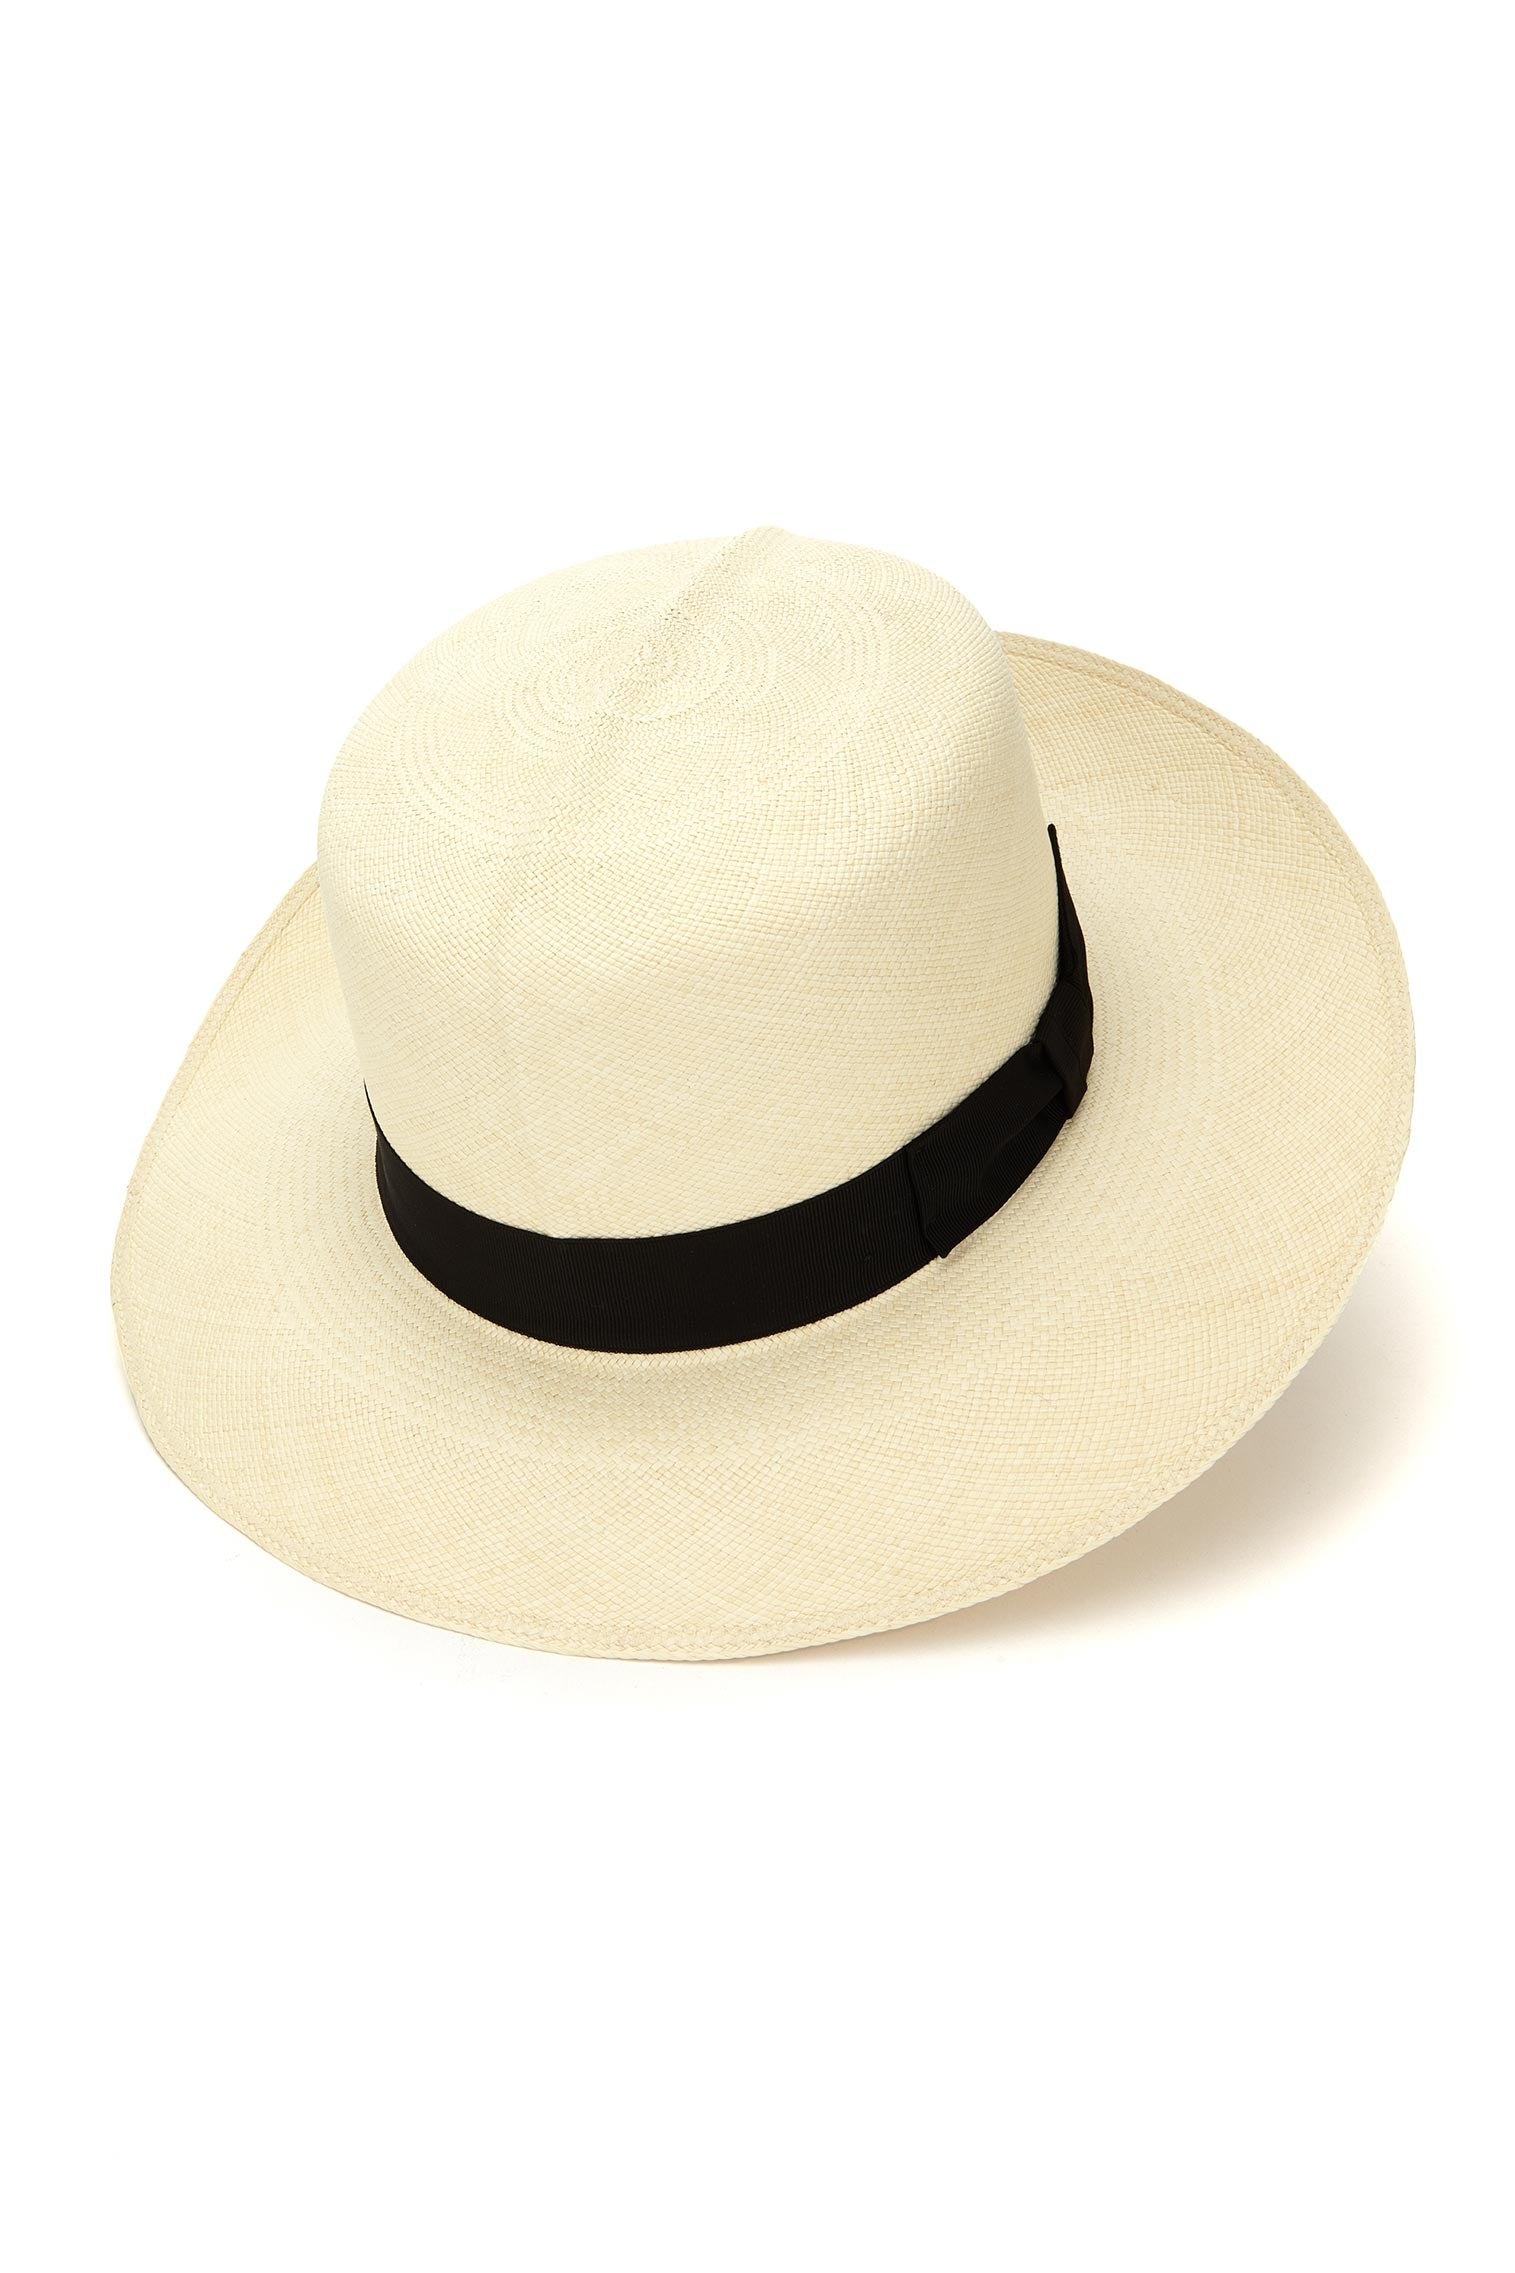 Rollable Superfino Montecristi Panama - Packable & Rollable Hats - Lock & Co. Hatters London UK